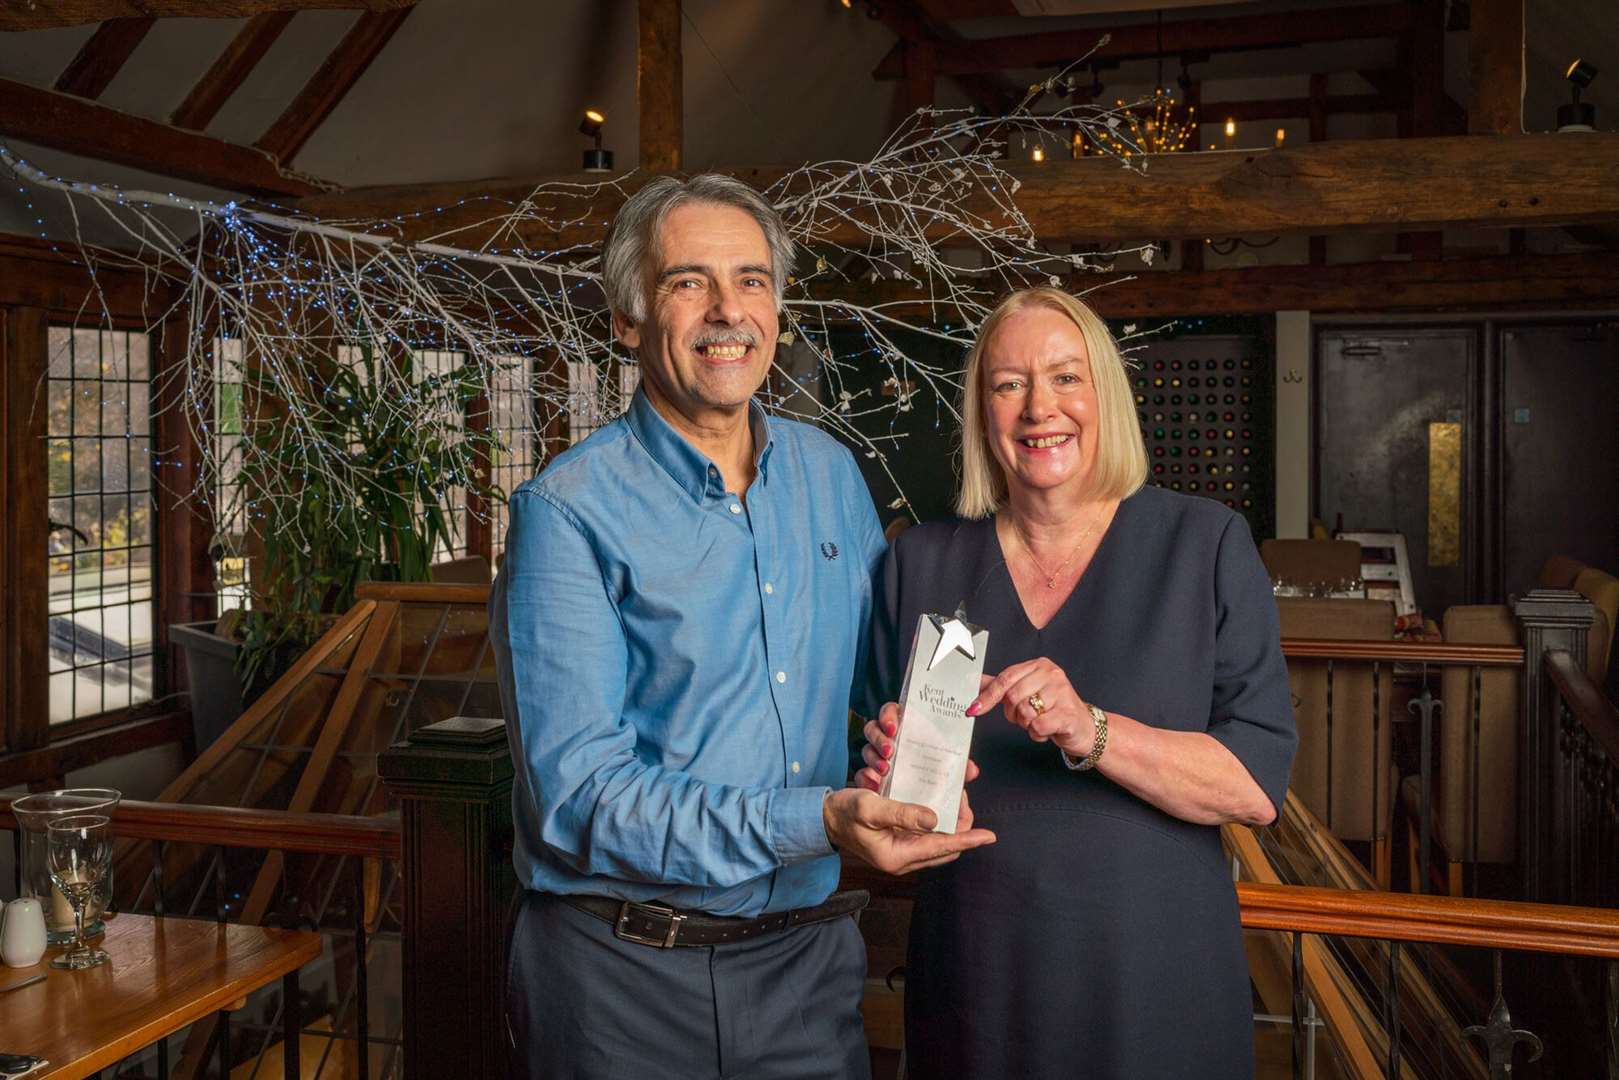 Philippe and Janet Sorak, general managers at The Barn in Tunbridge Wells, with their Kent Wedding Awards trophy